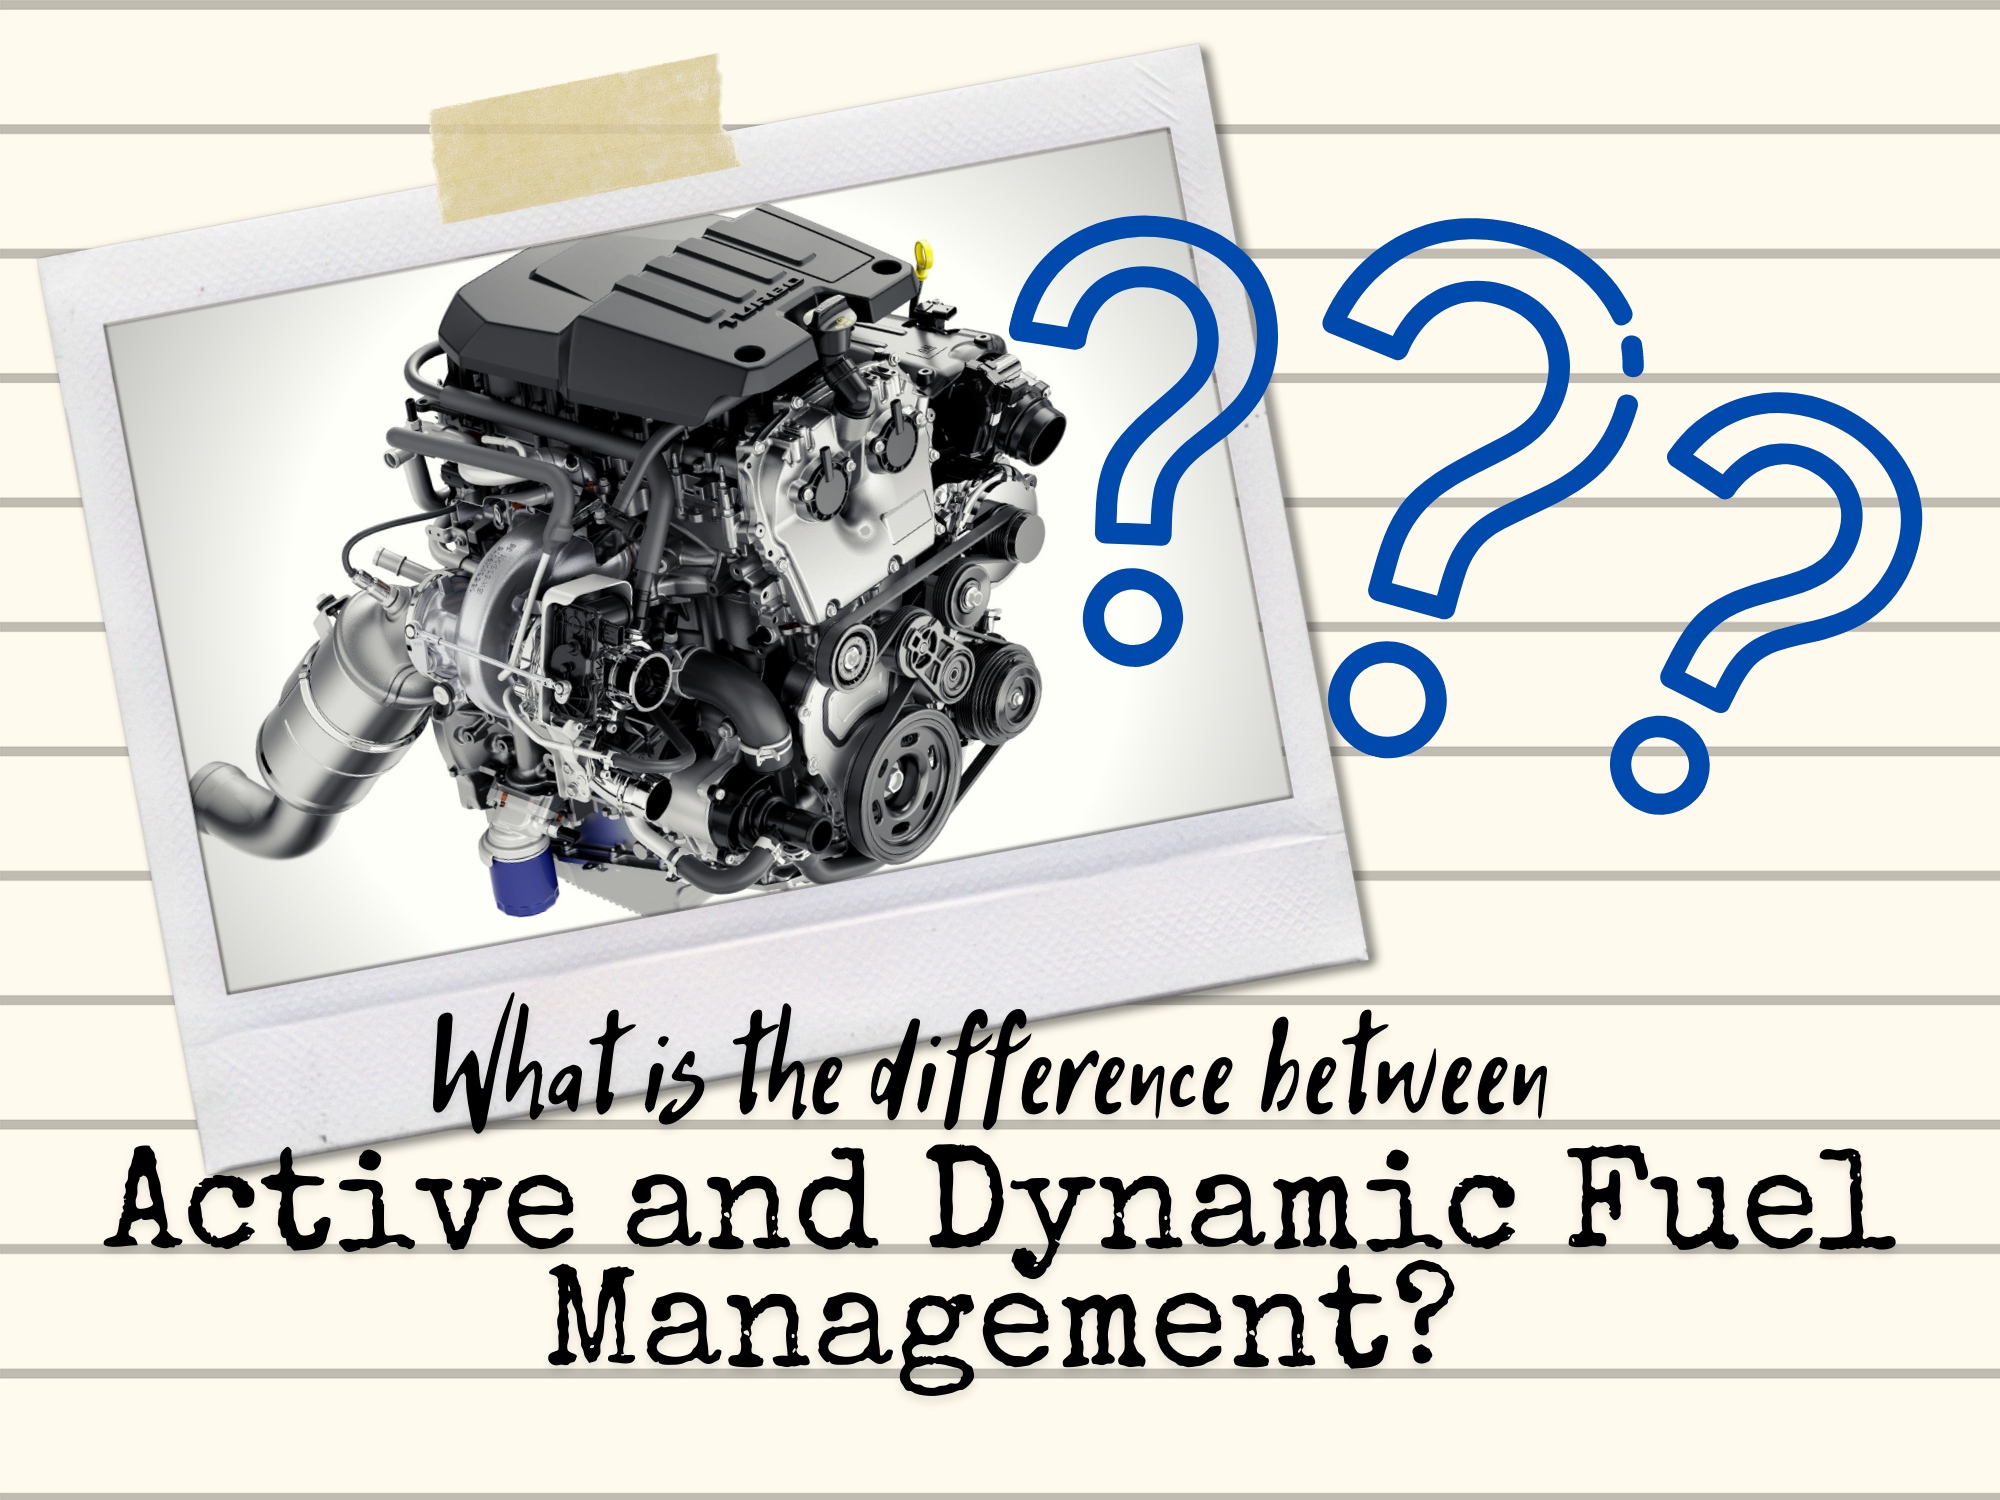 What is the difference between Active and Dynamic Fuel management